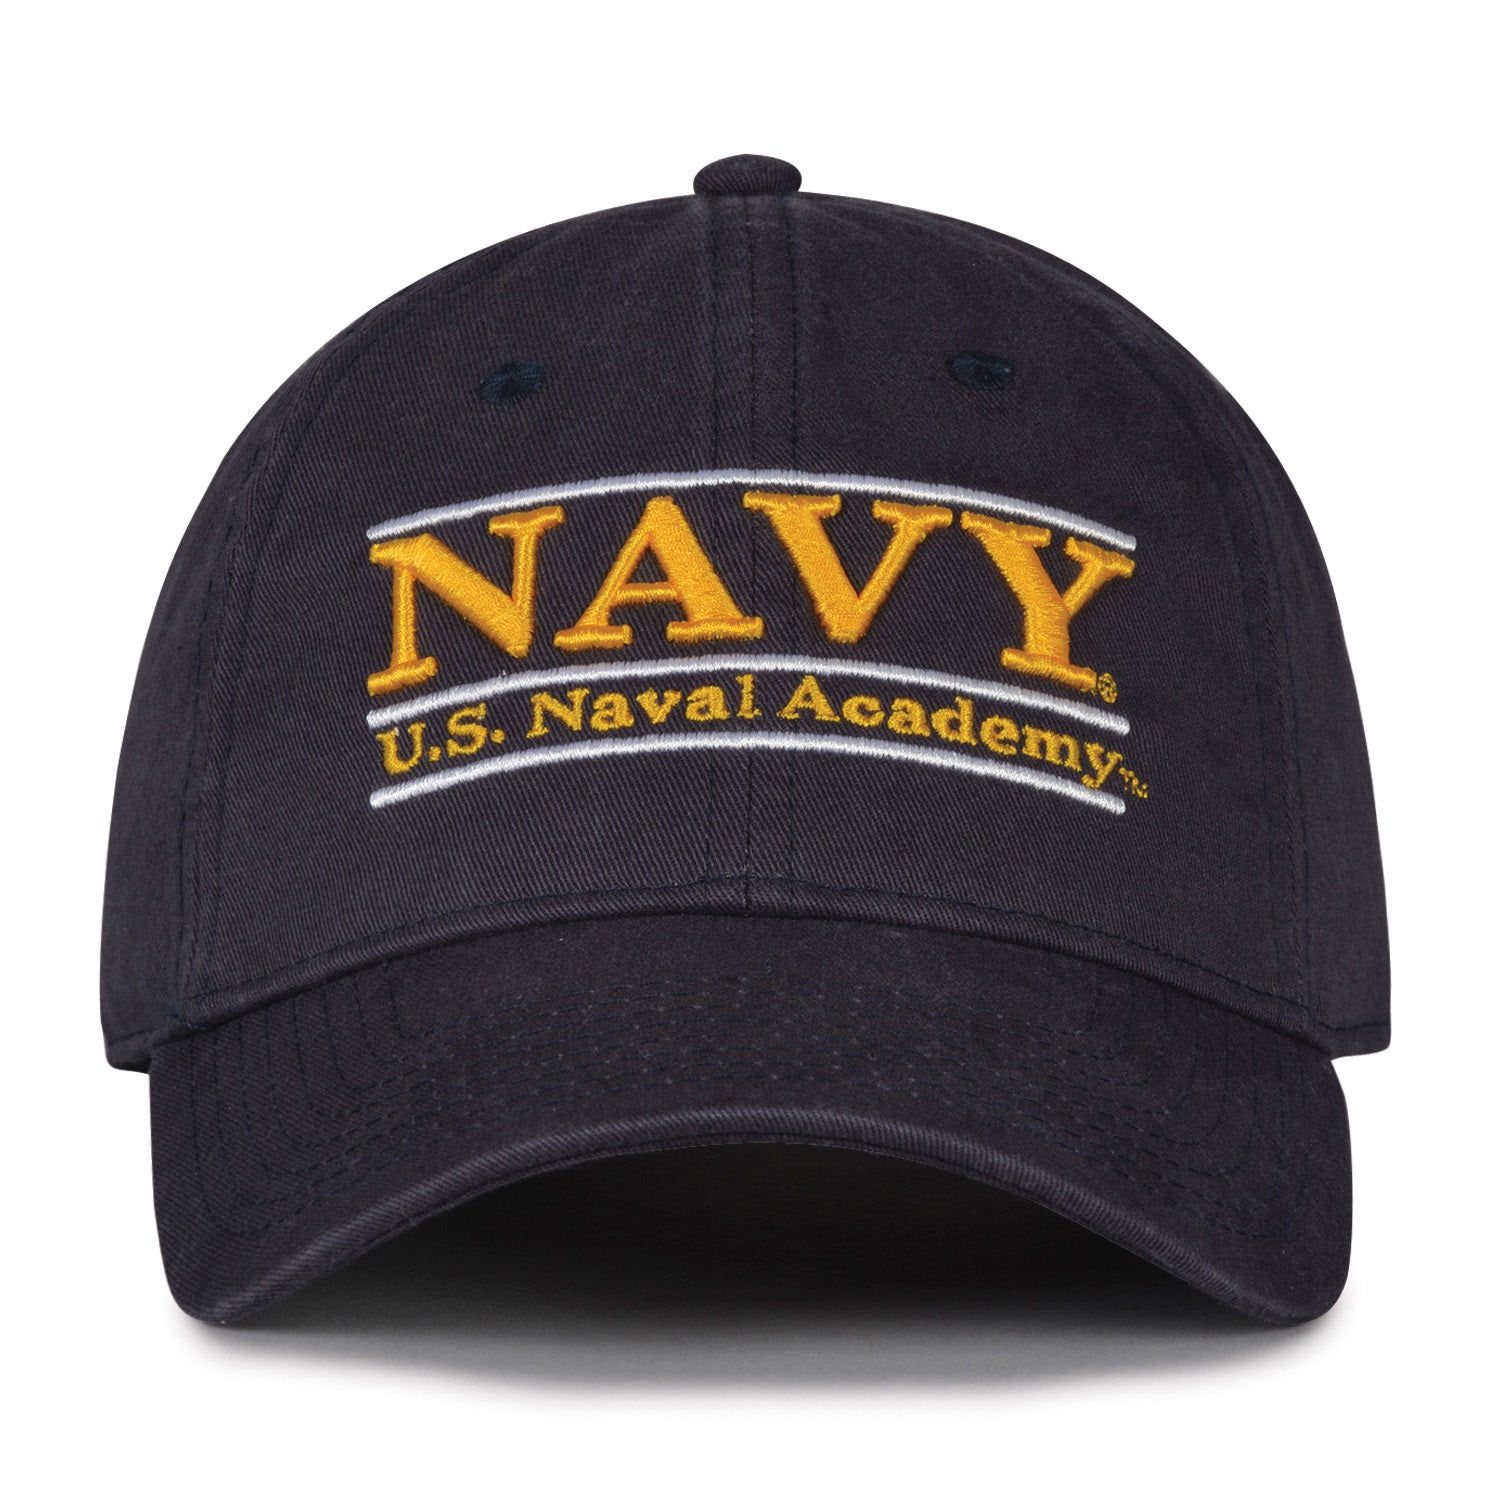 NAVY' RELAXED TWILL BAR – The Game Caps